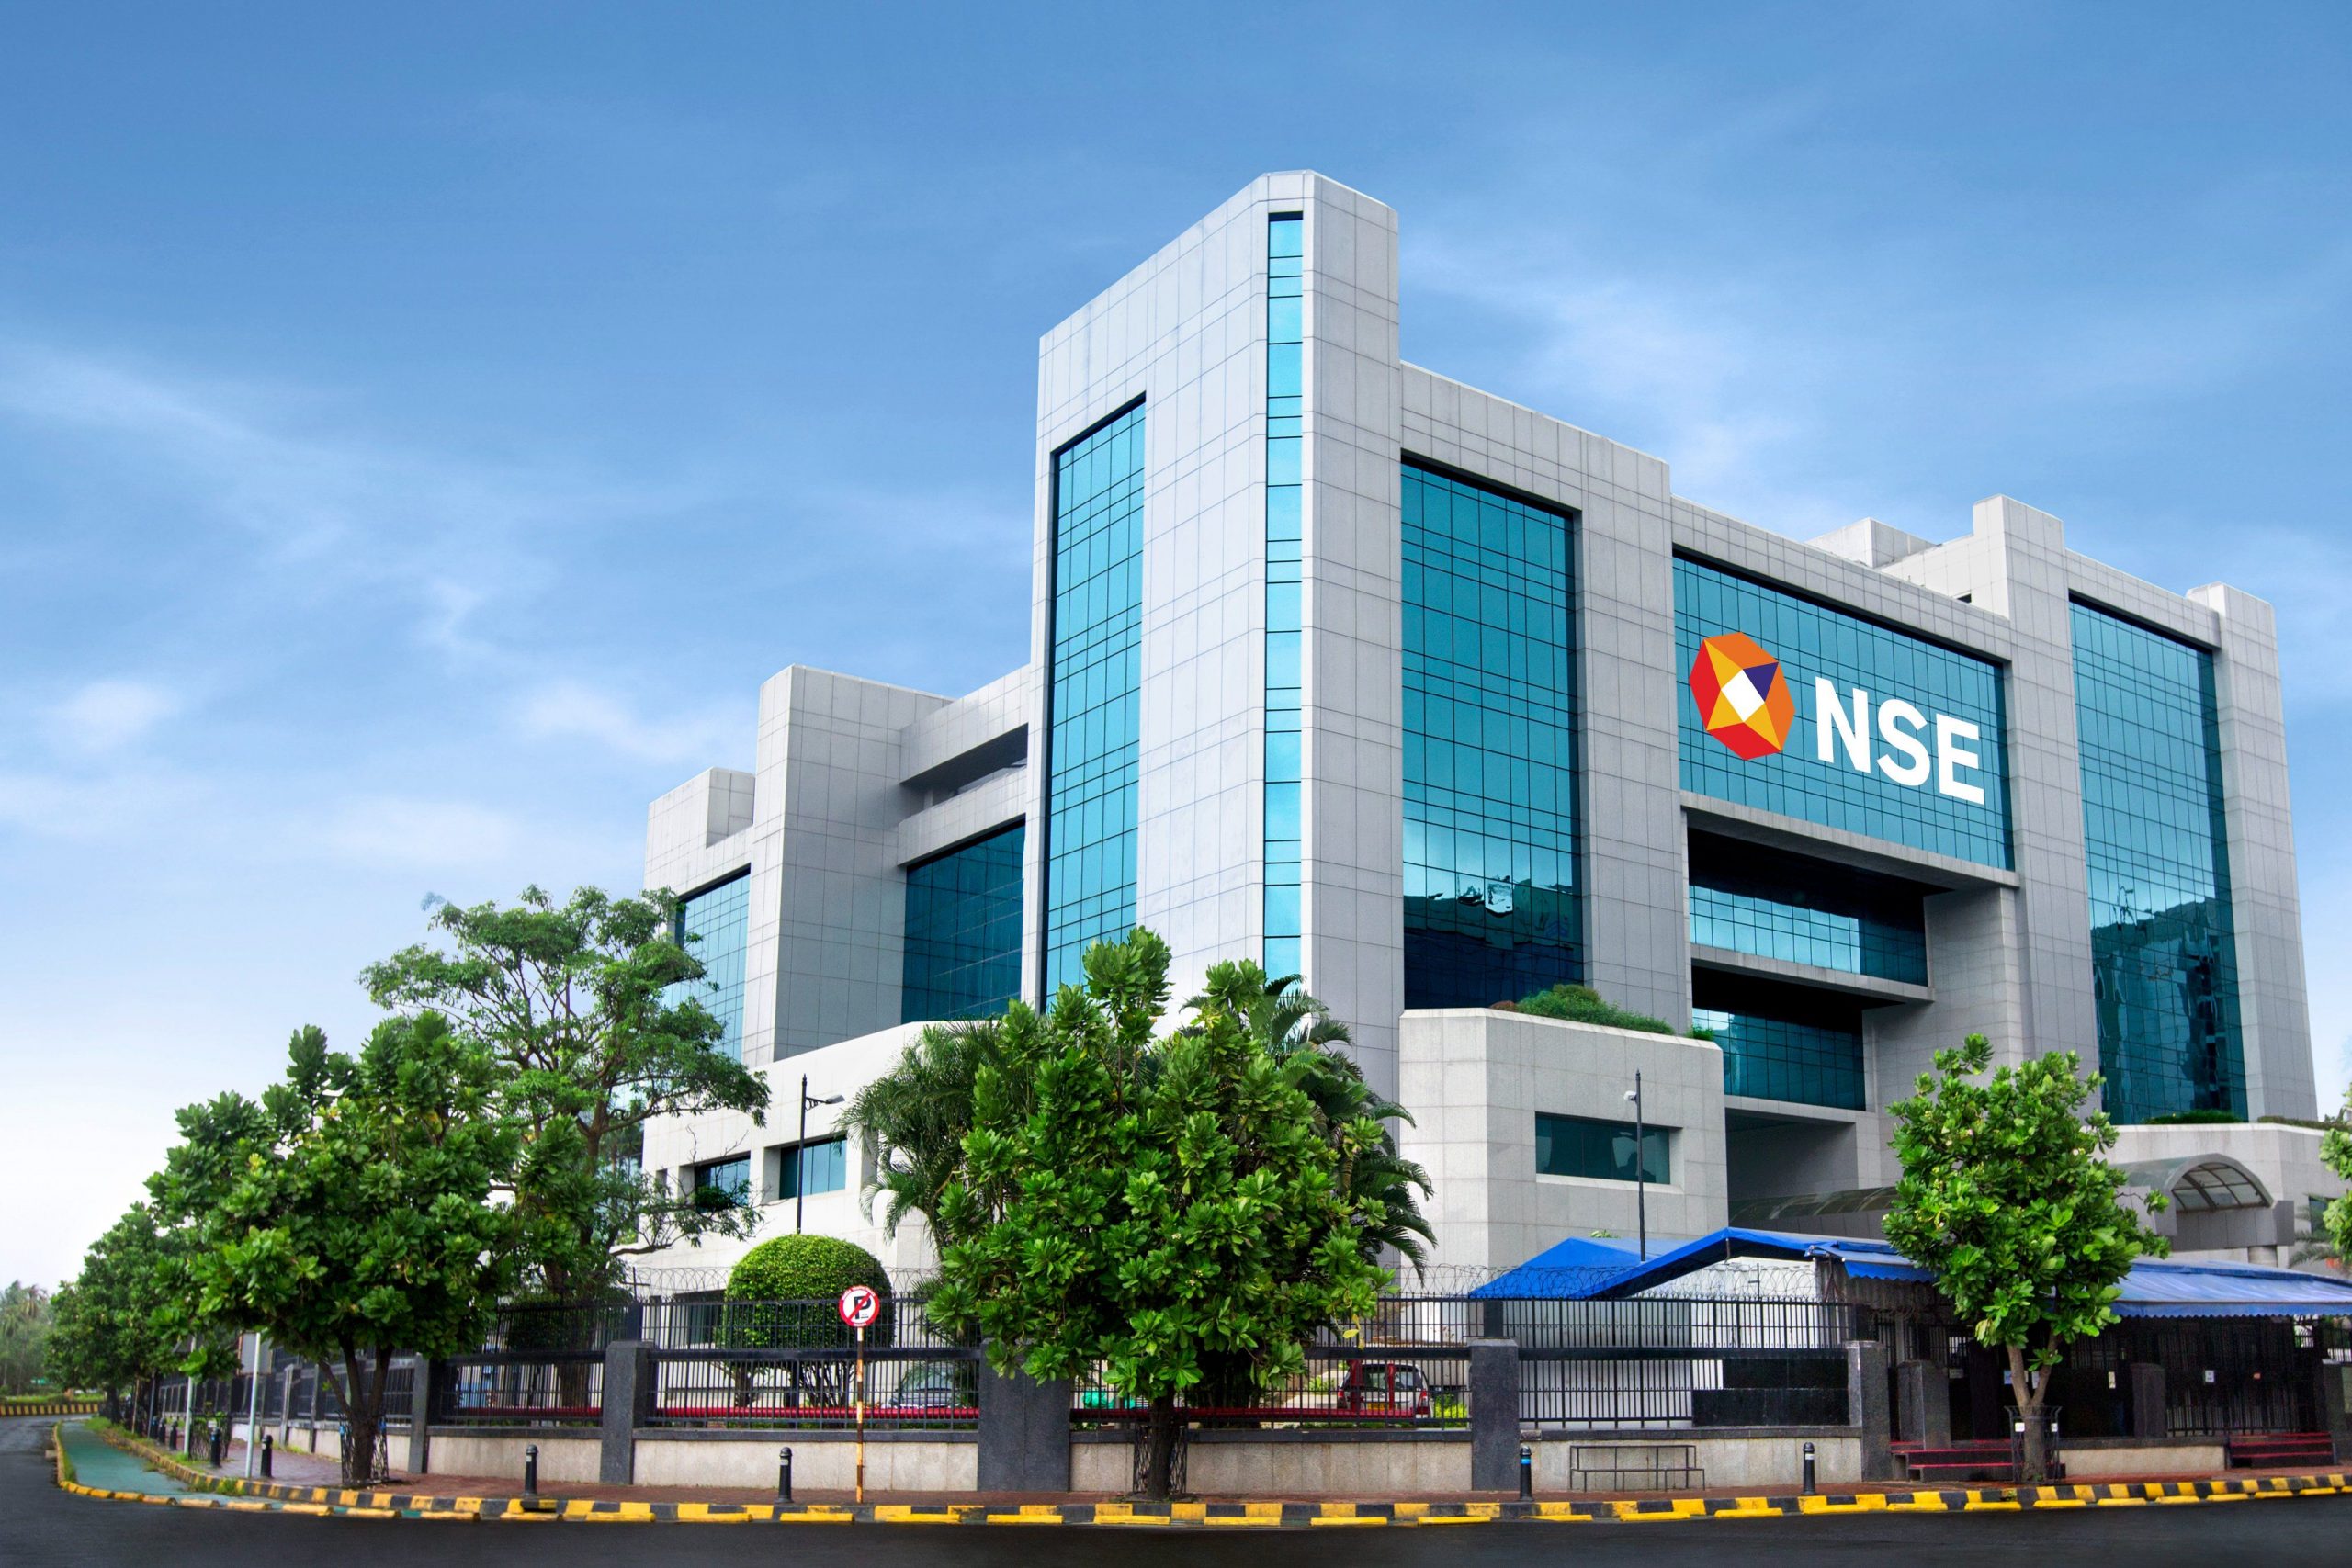 NSE F&O Ban: BHEL, PNB, NALCO, IDEA and others under ban today